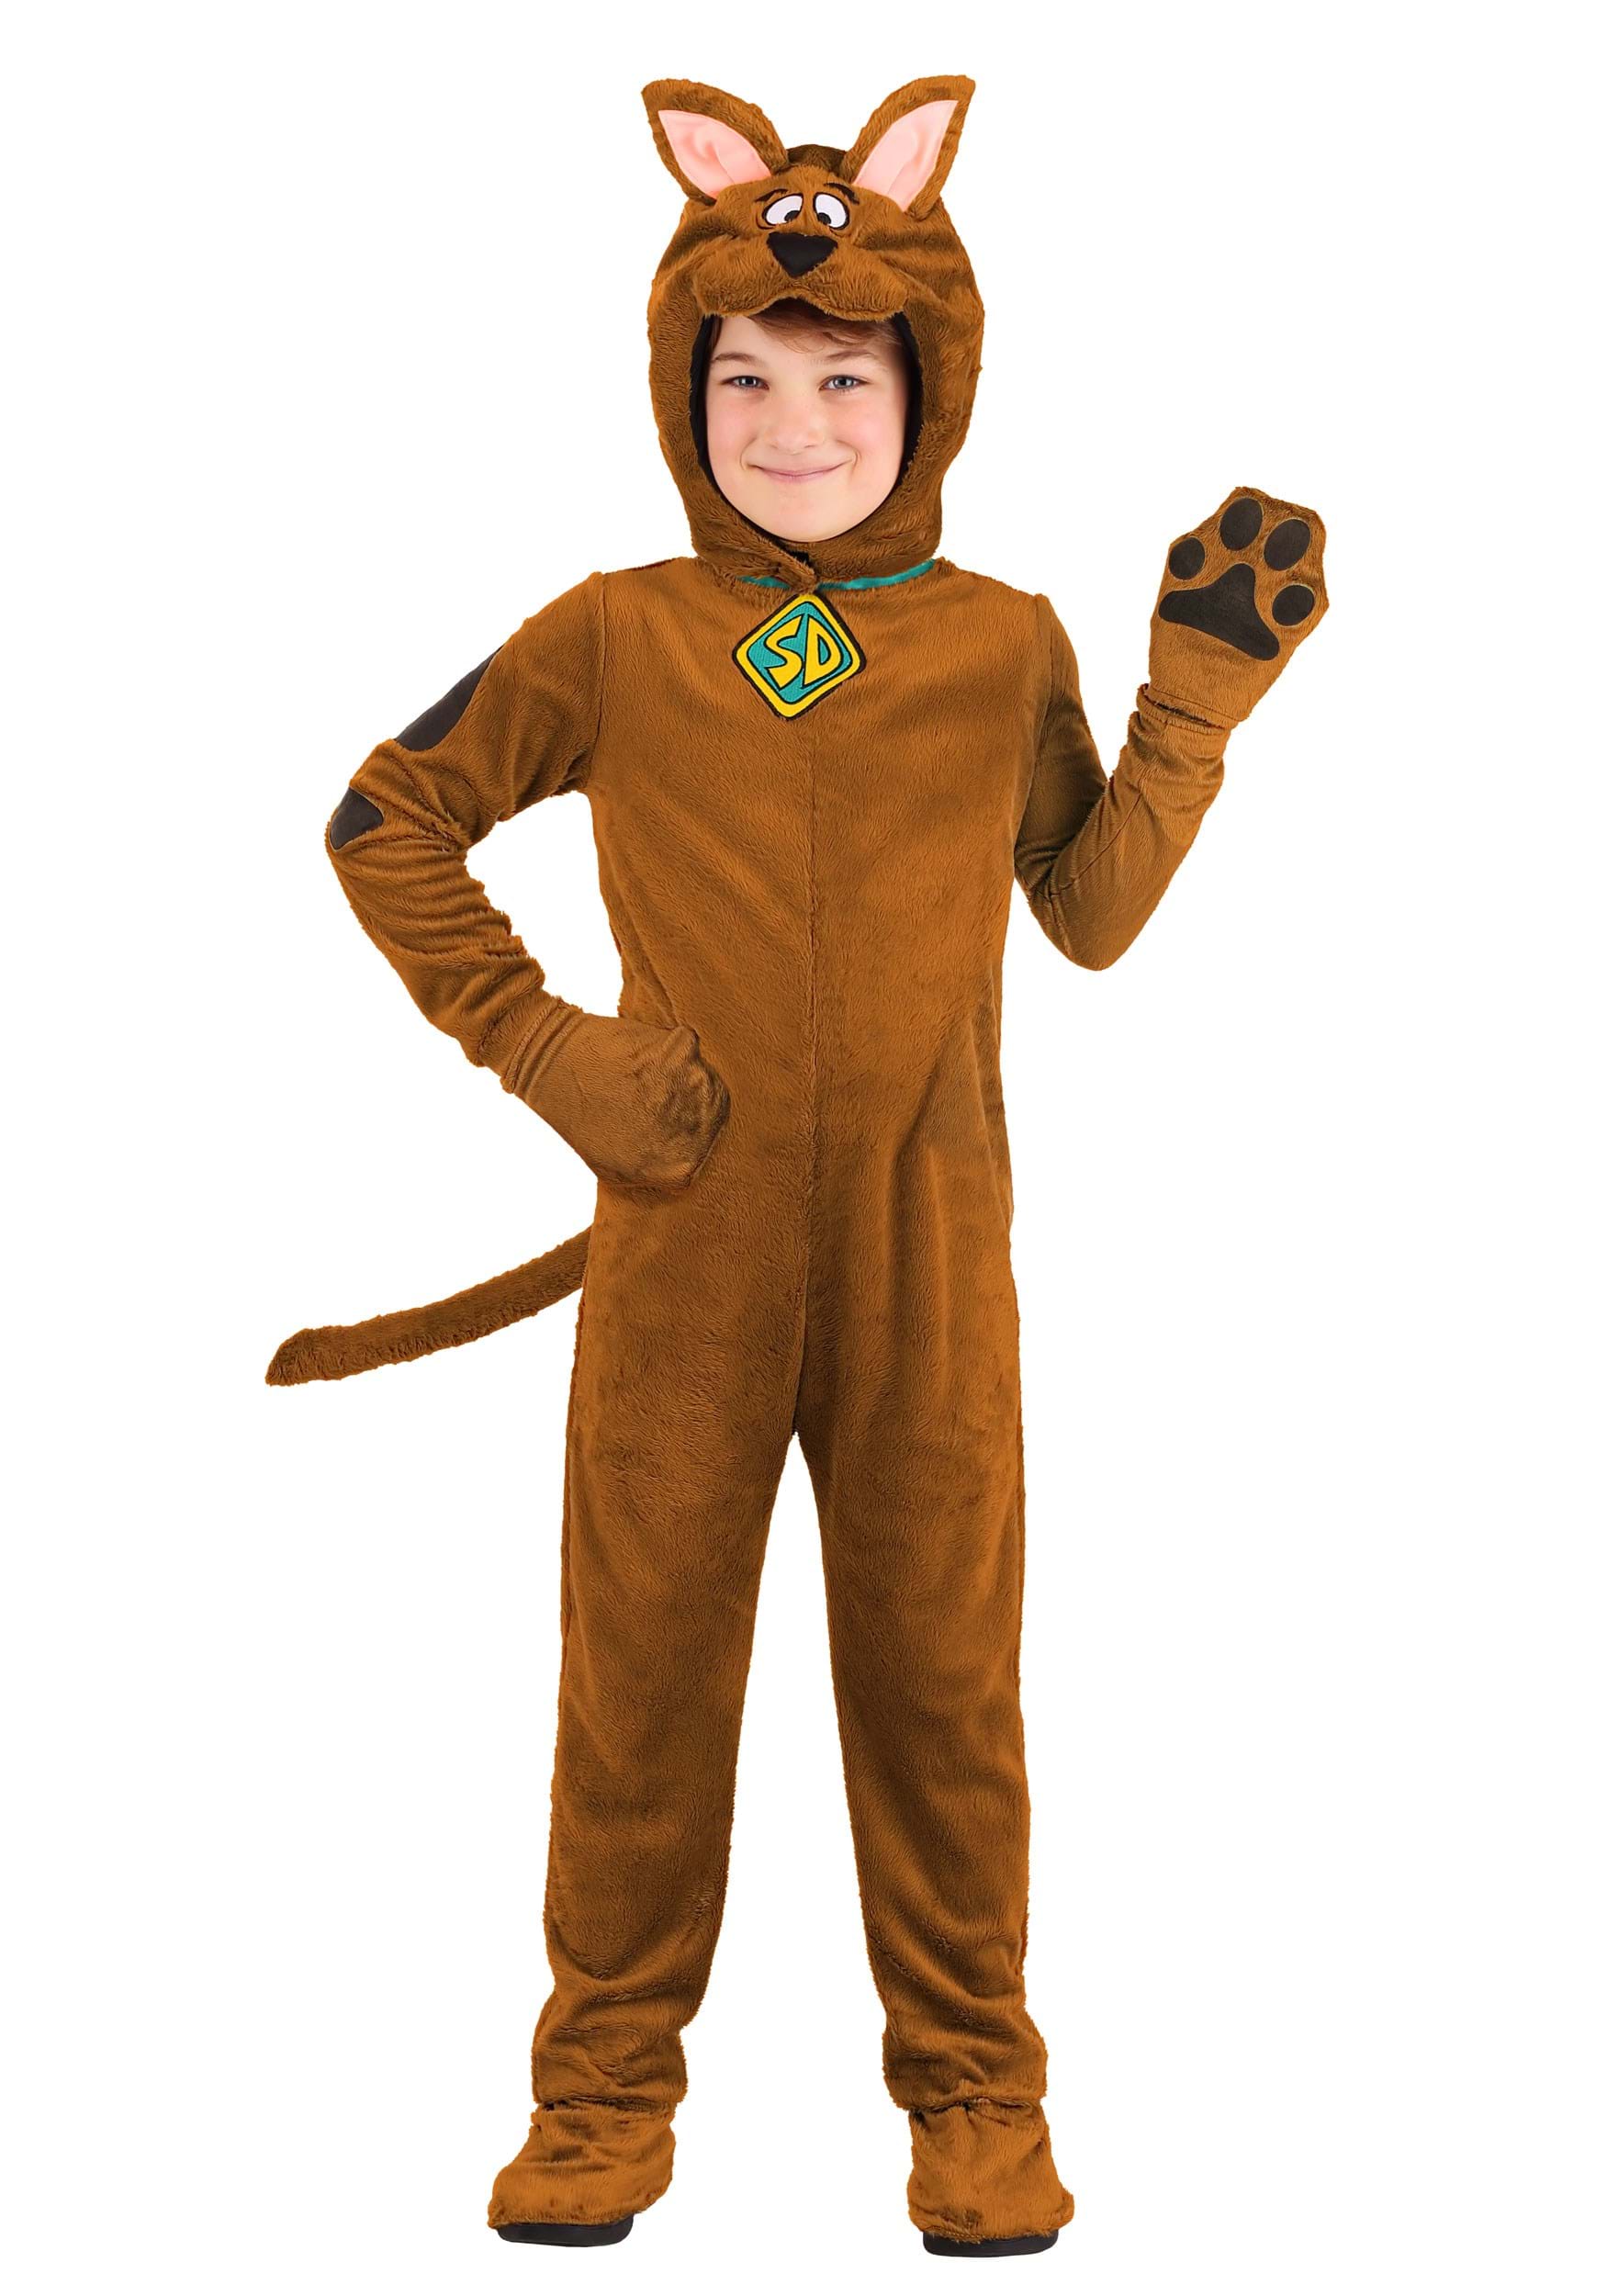 Photos - Fancy Dress Deluxe Jerry Leigh Scooby Doo Costume  Kids Black/Yellow/Green FUN1 